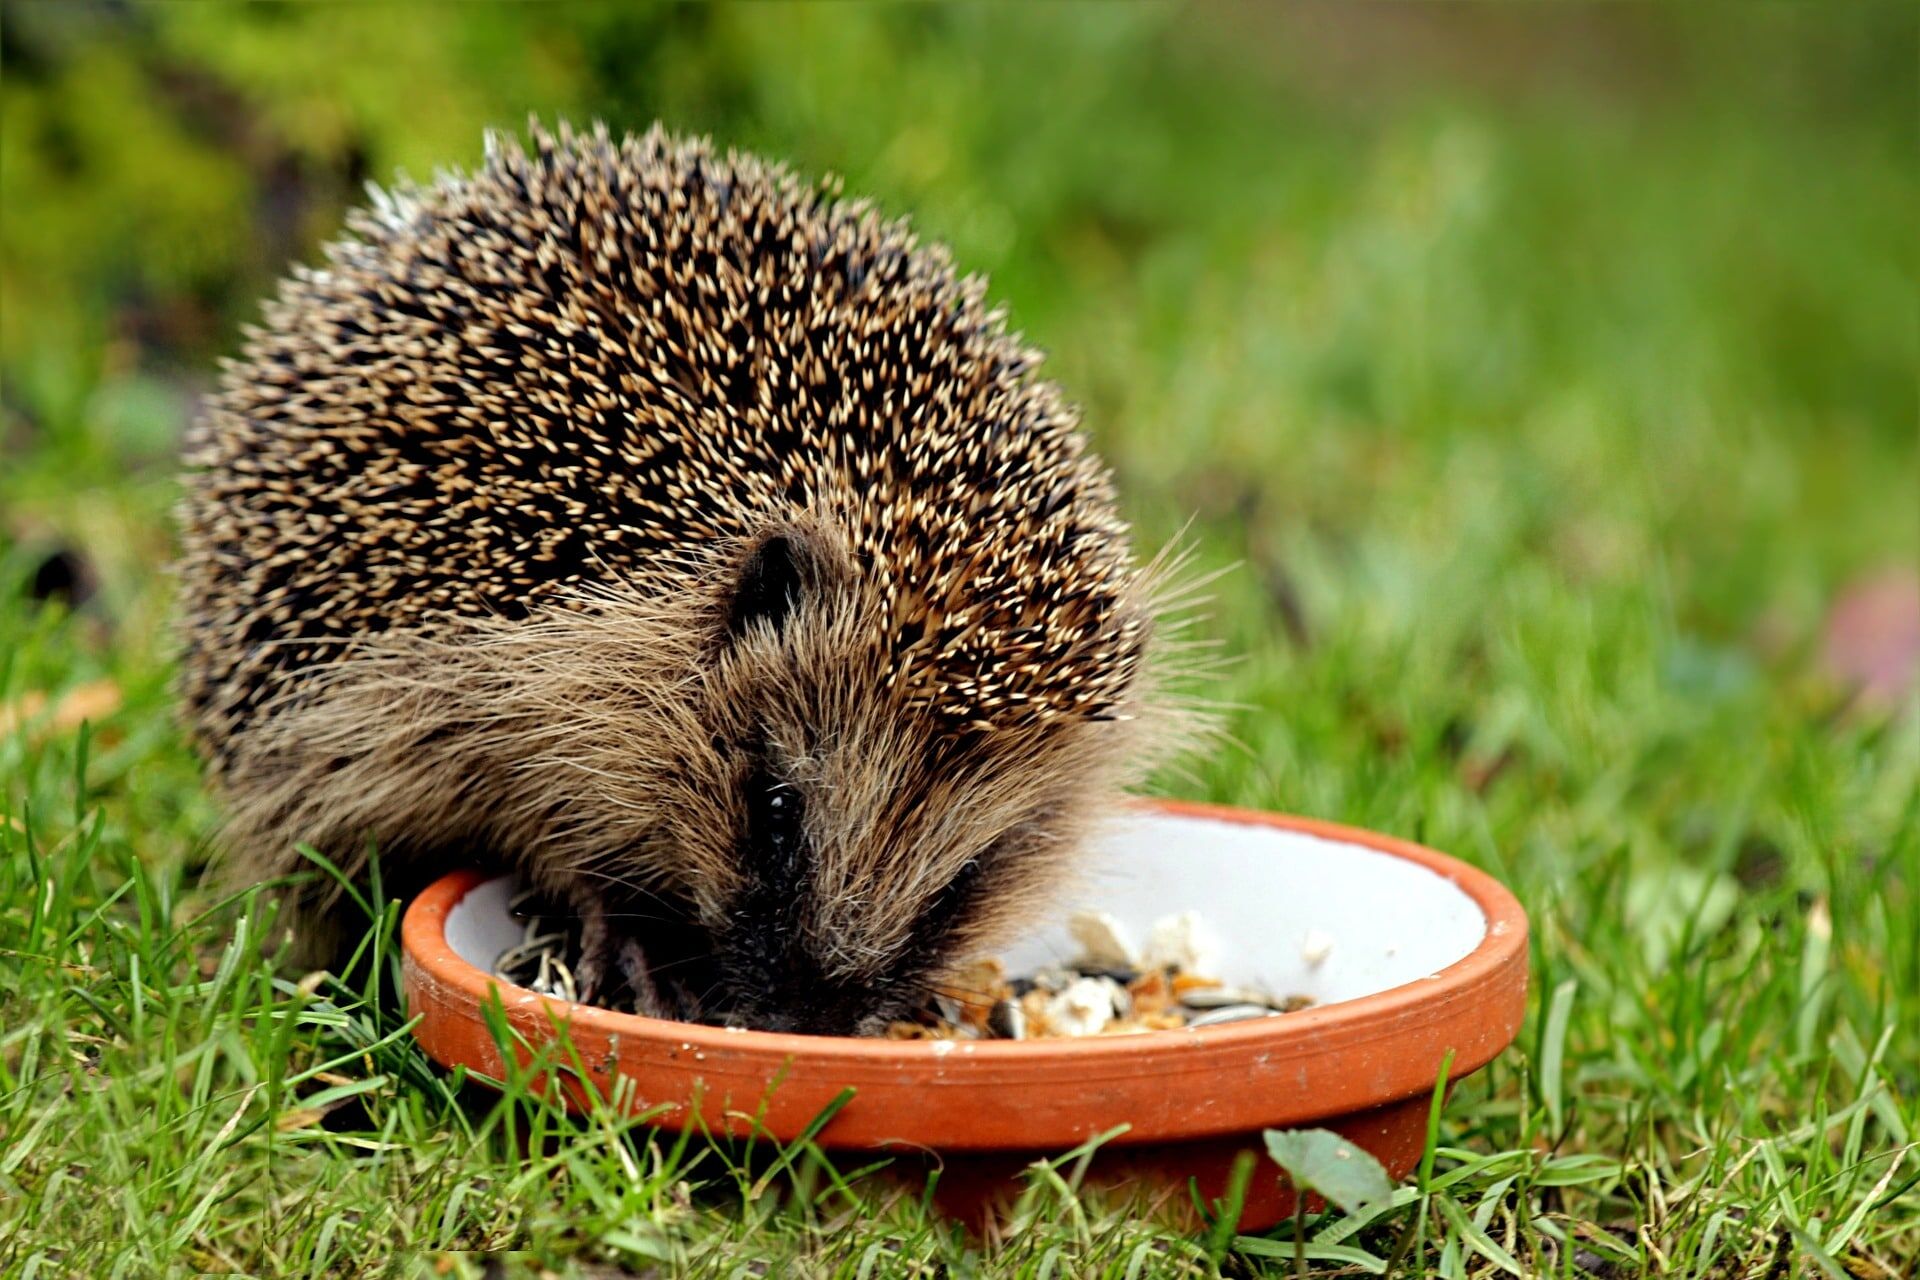 Hedgehog eating from small bowl on lawn